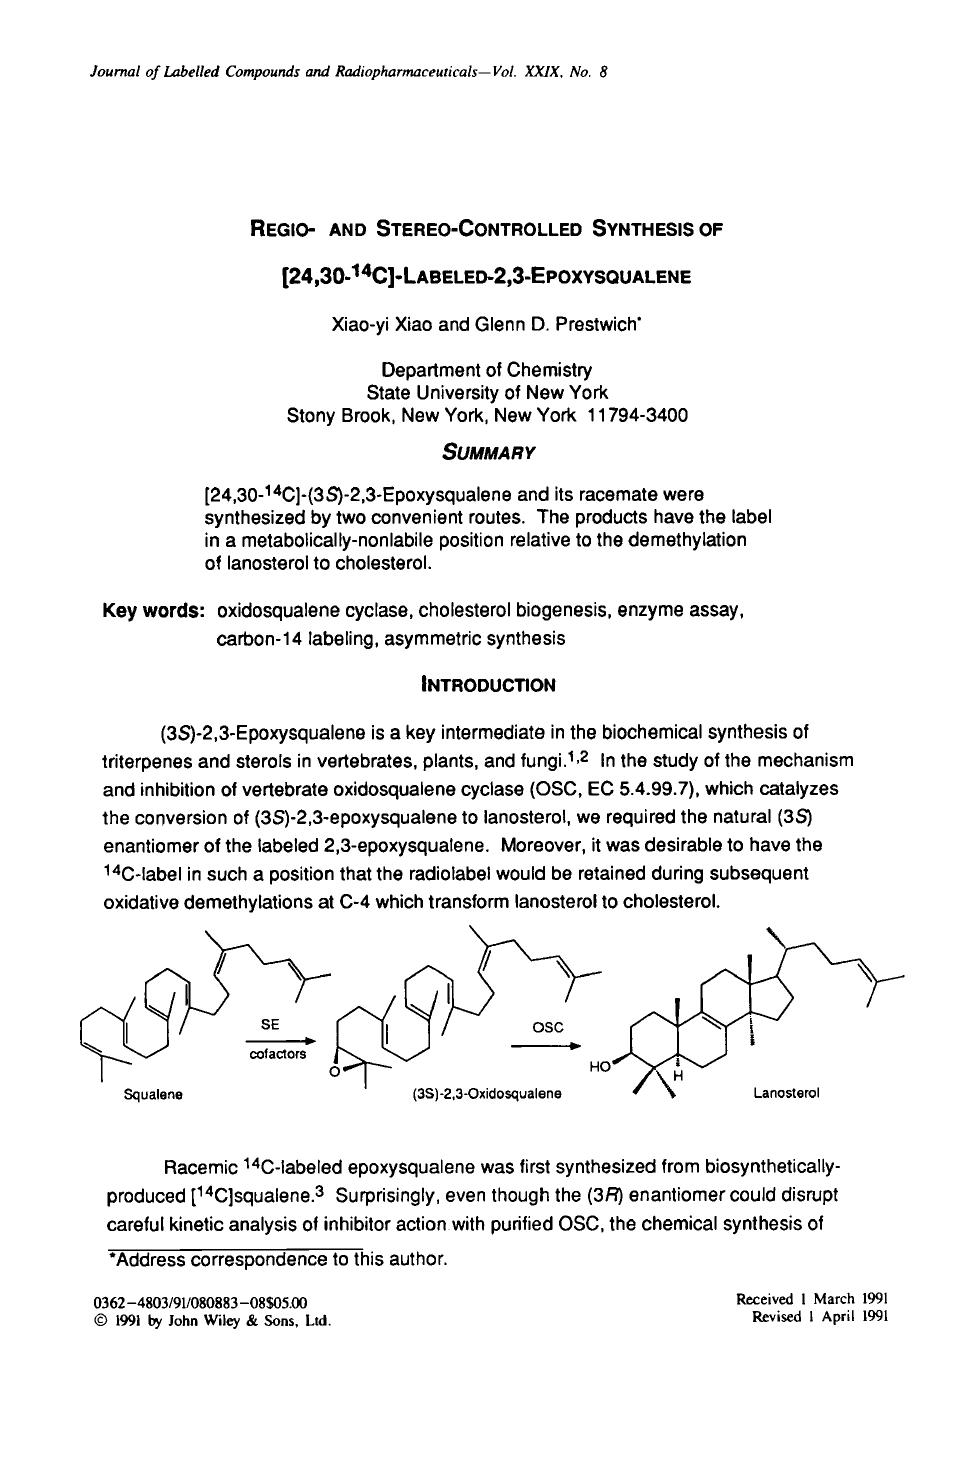 Regio- and stereo-controlled synthesis of [24,30-14C]-labeled-2,3-epoxysqualene by Unknown